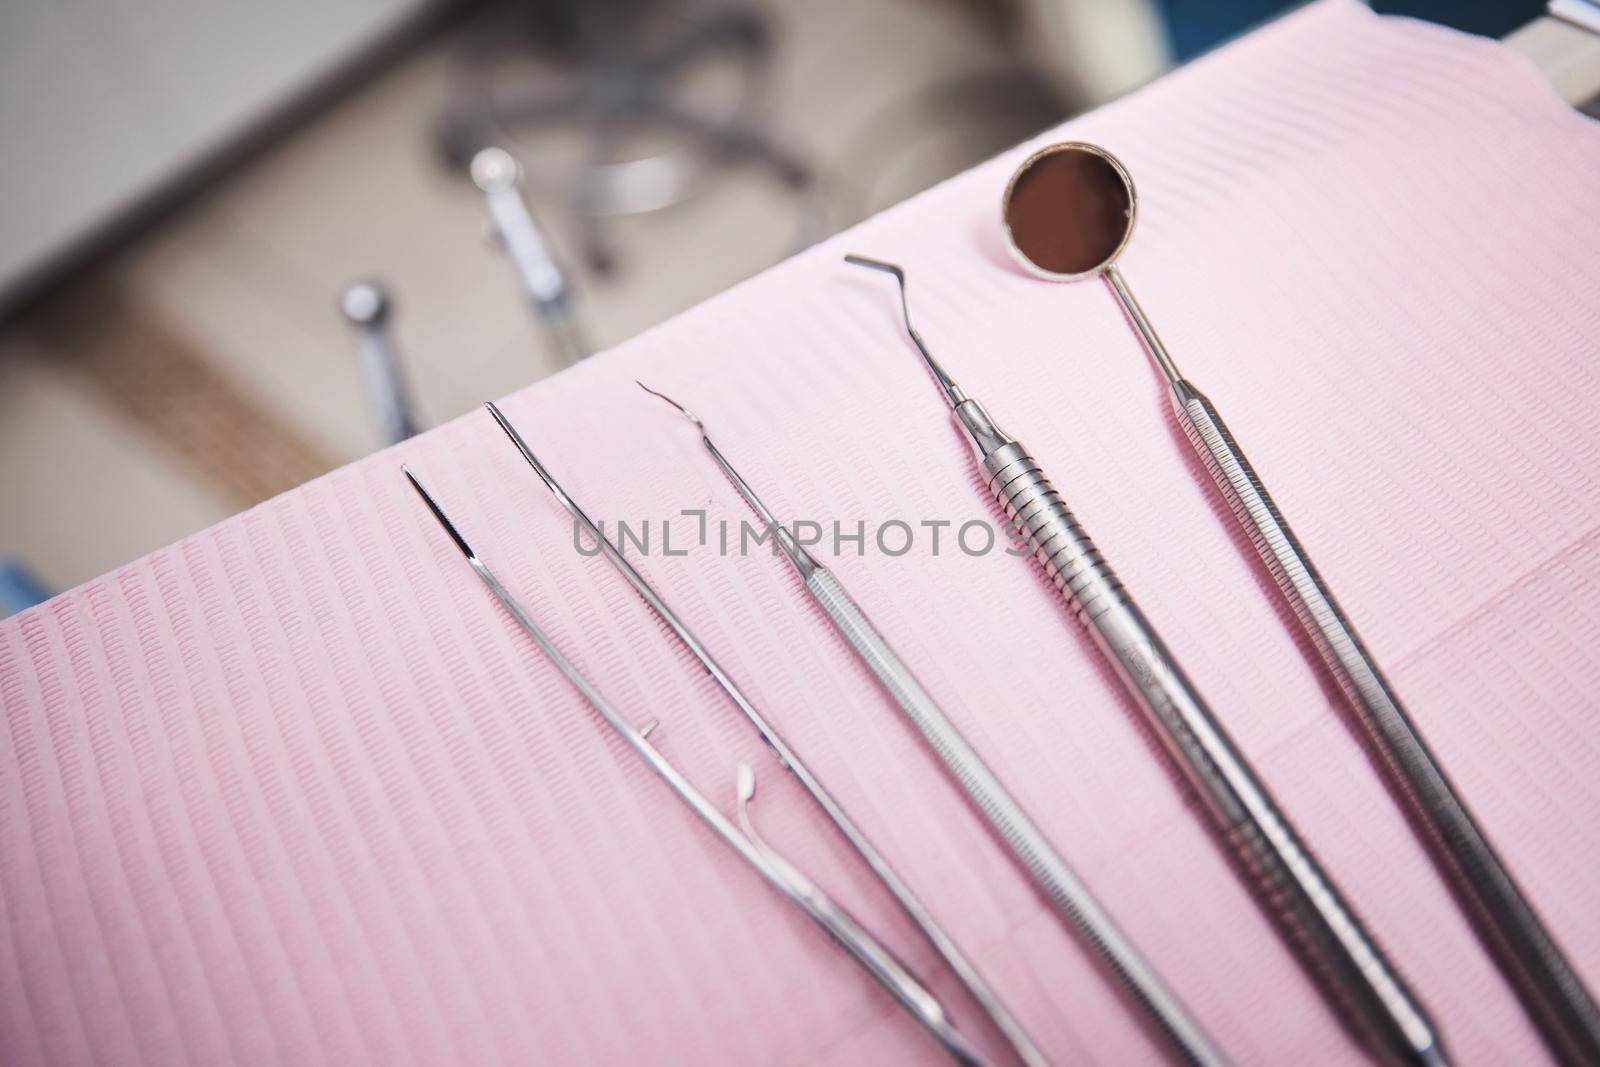 All set to restore your smile. various dental tools on a table